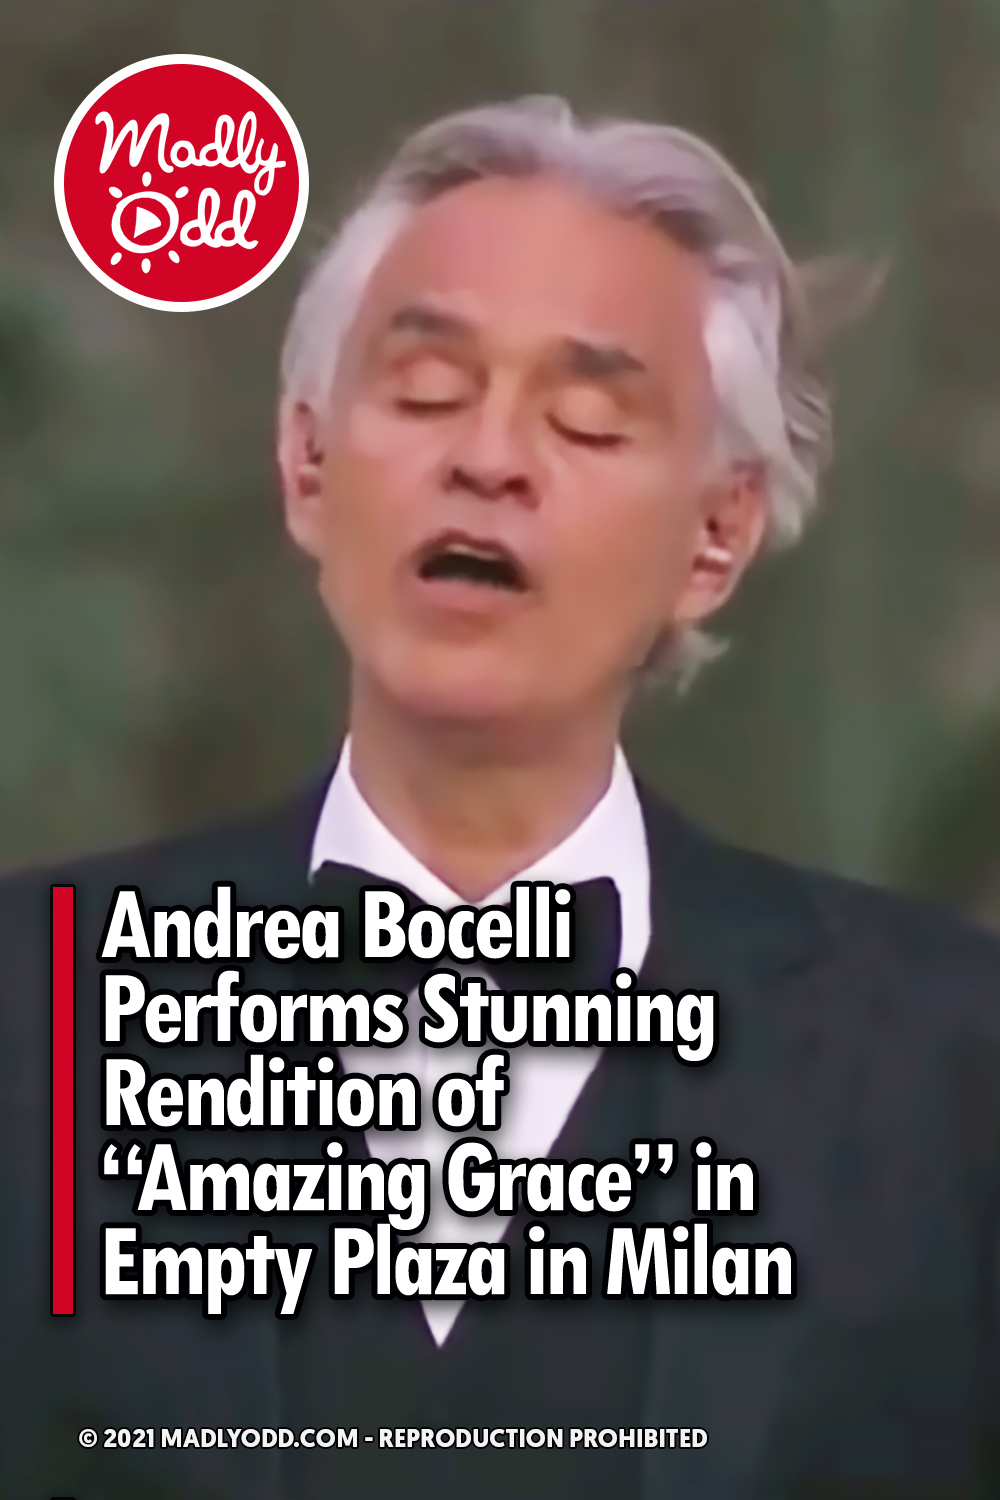 Andrea Bocelli Performs Stunning Rendition of “Amazing Grace” in Empty Plaza in Milan